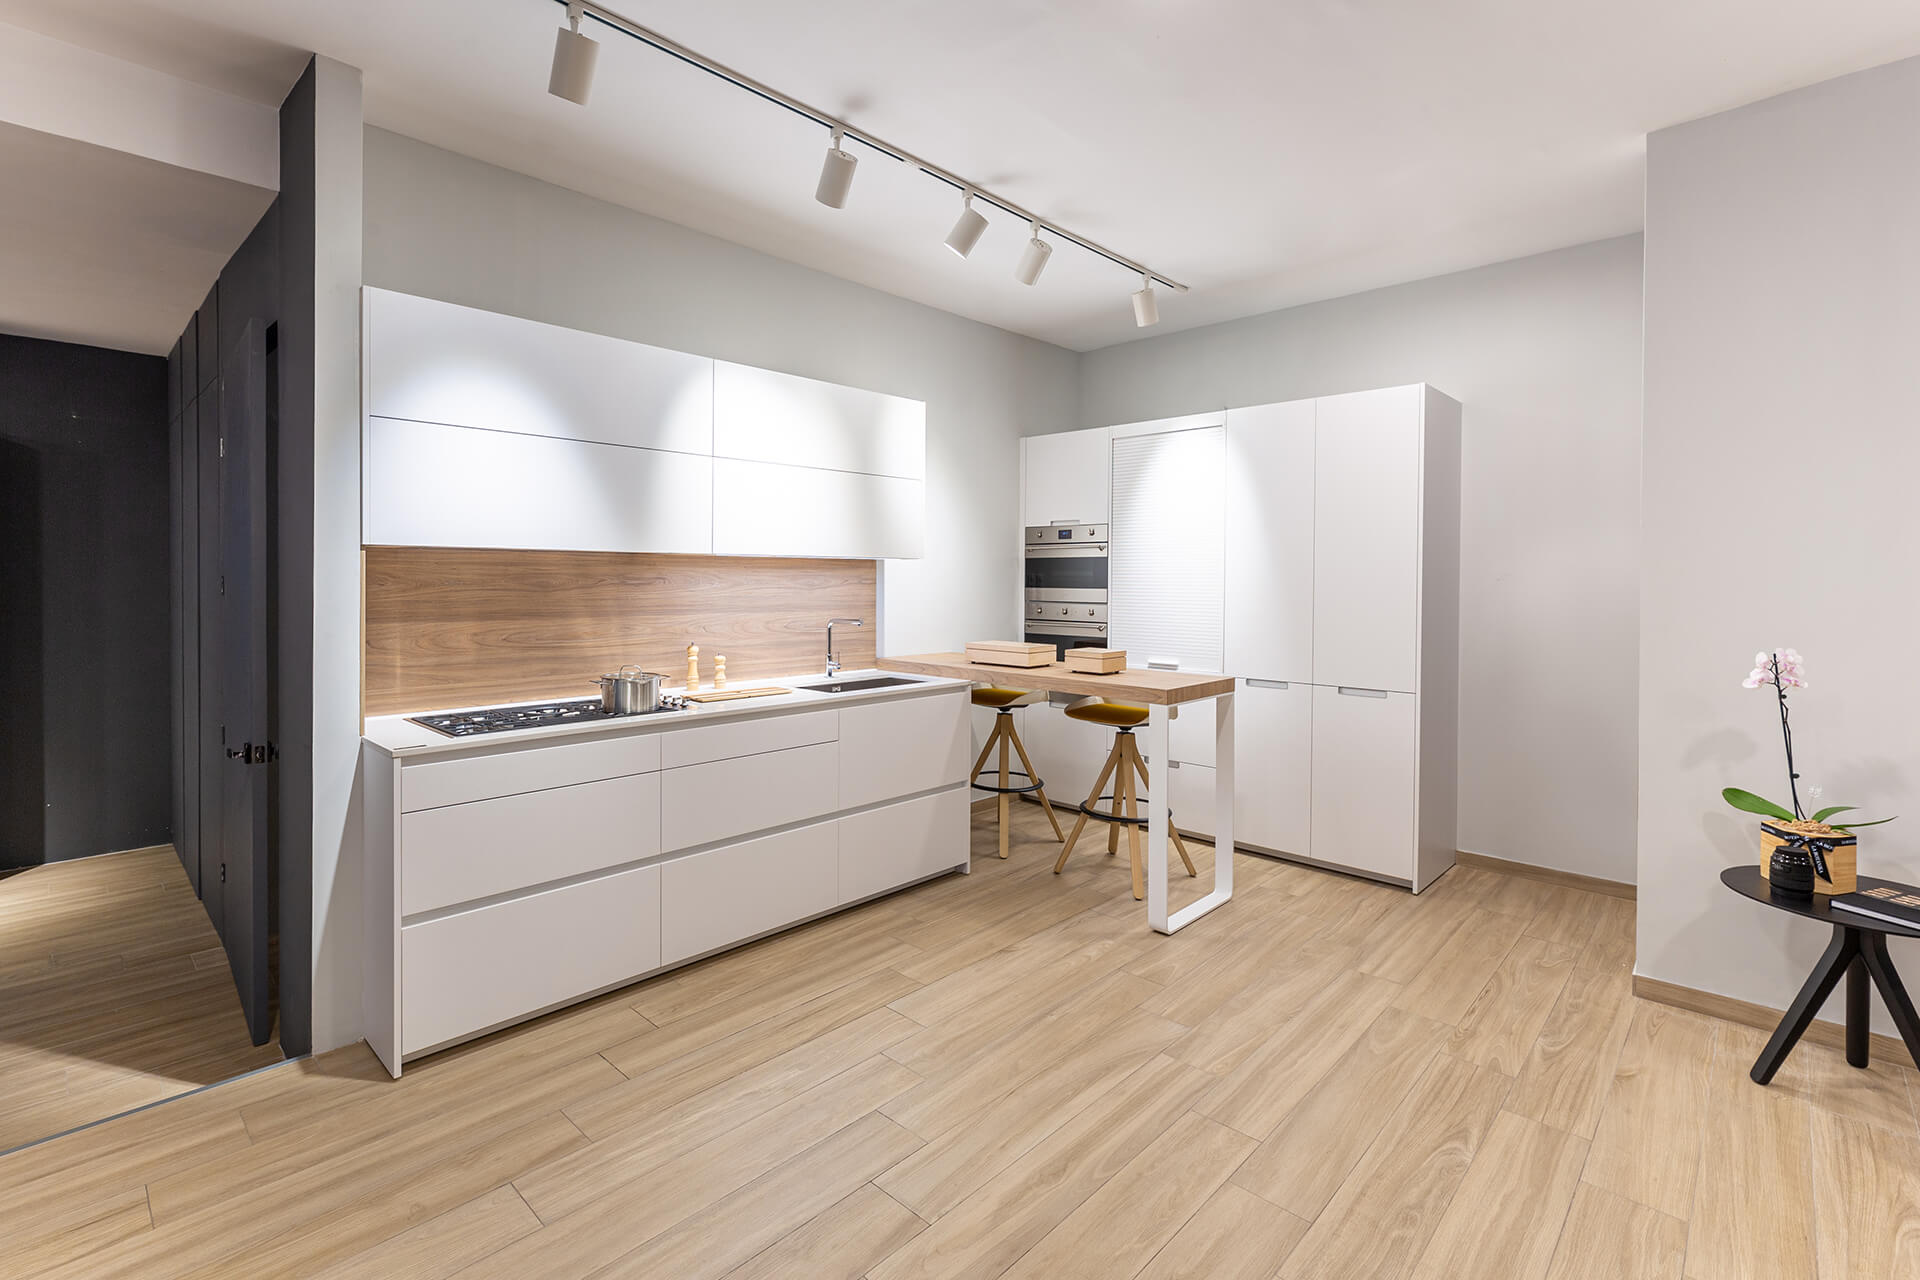 L-shaped white kitchen with worktop-mounted bar Santos Kitchens in Lima